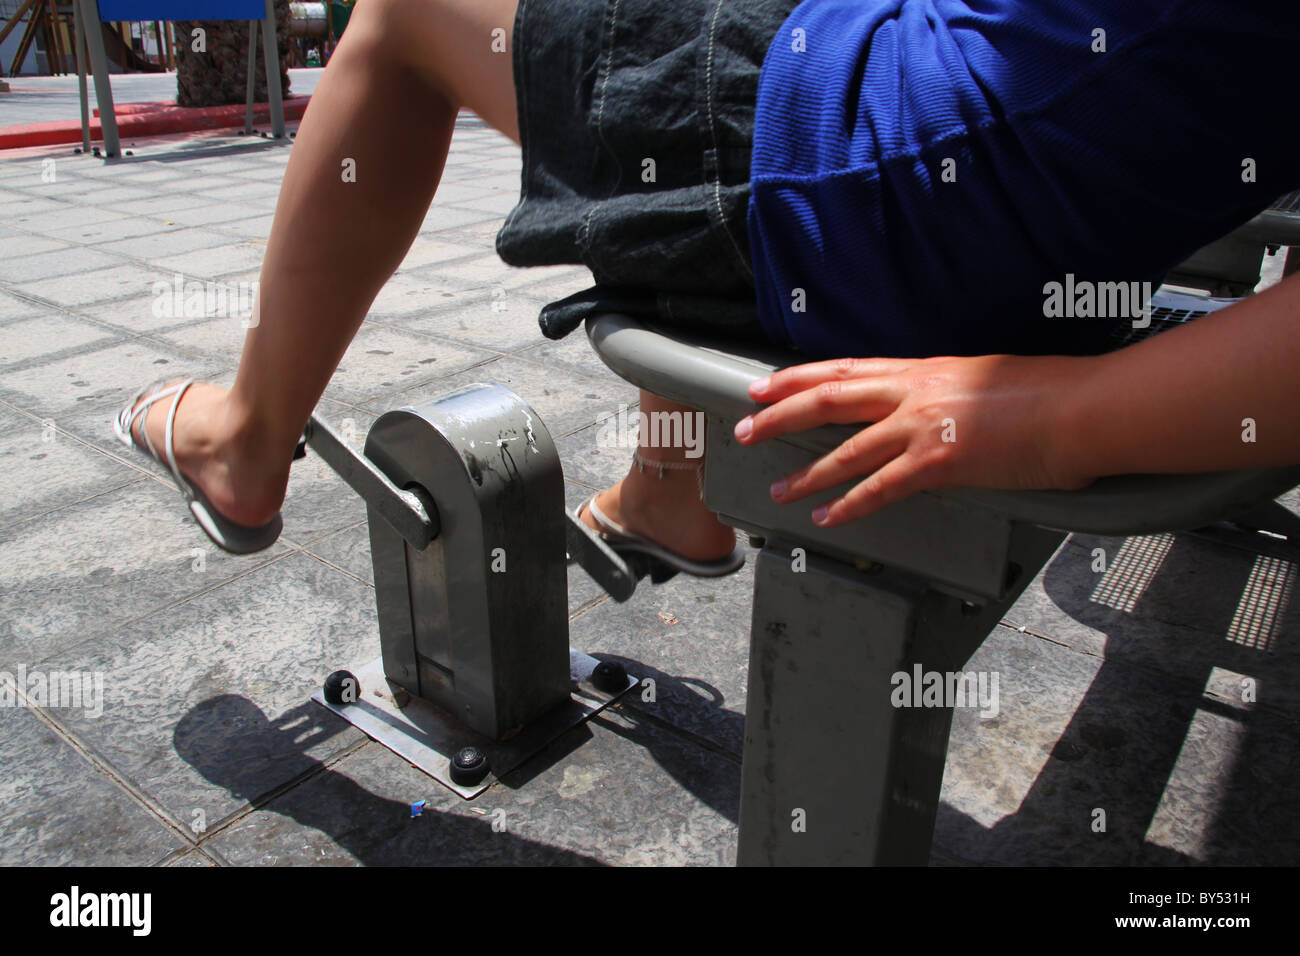 Young girl using exercise cycle in town square Stock Photo